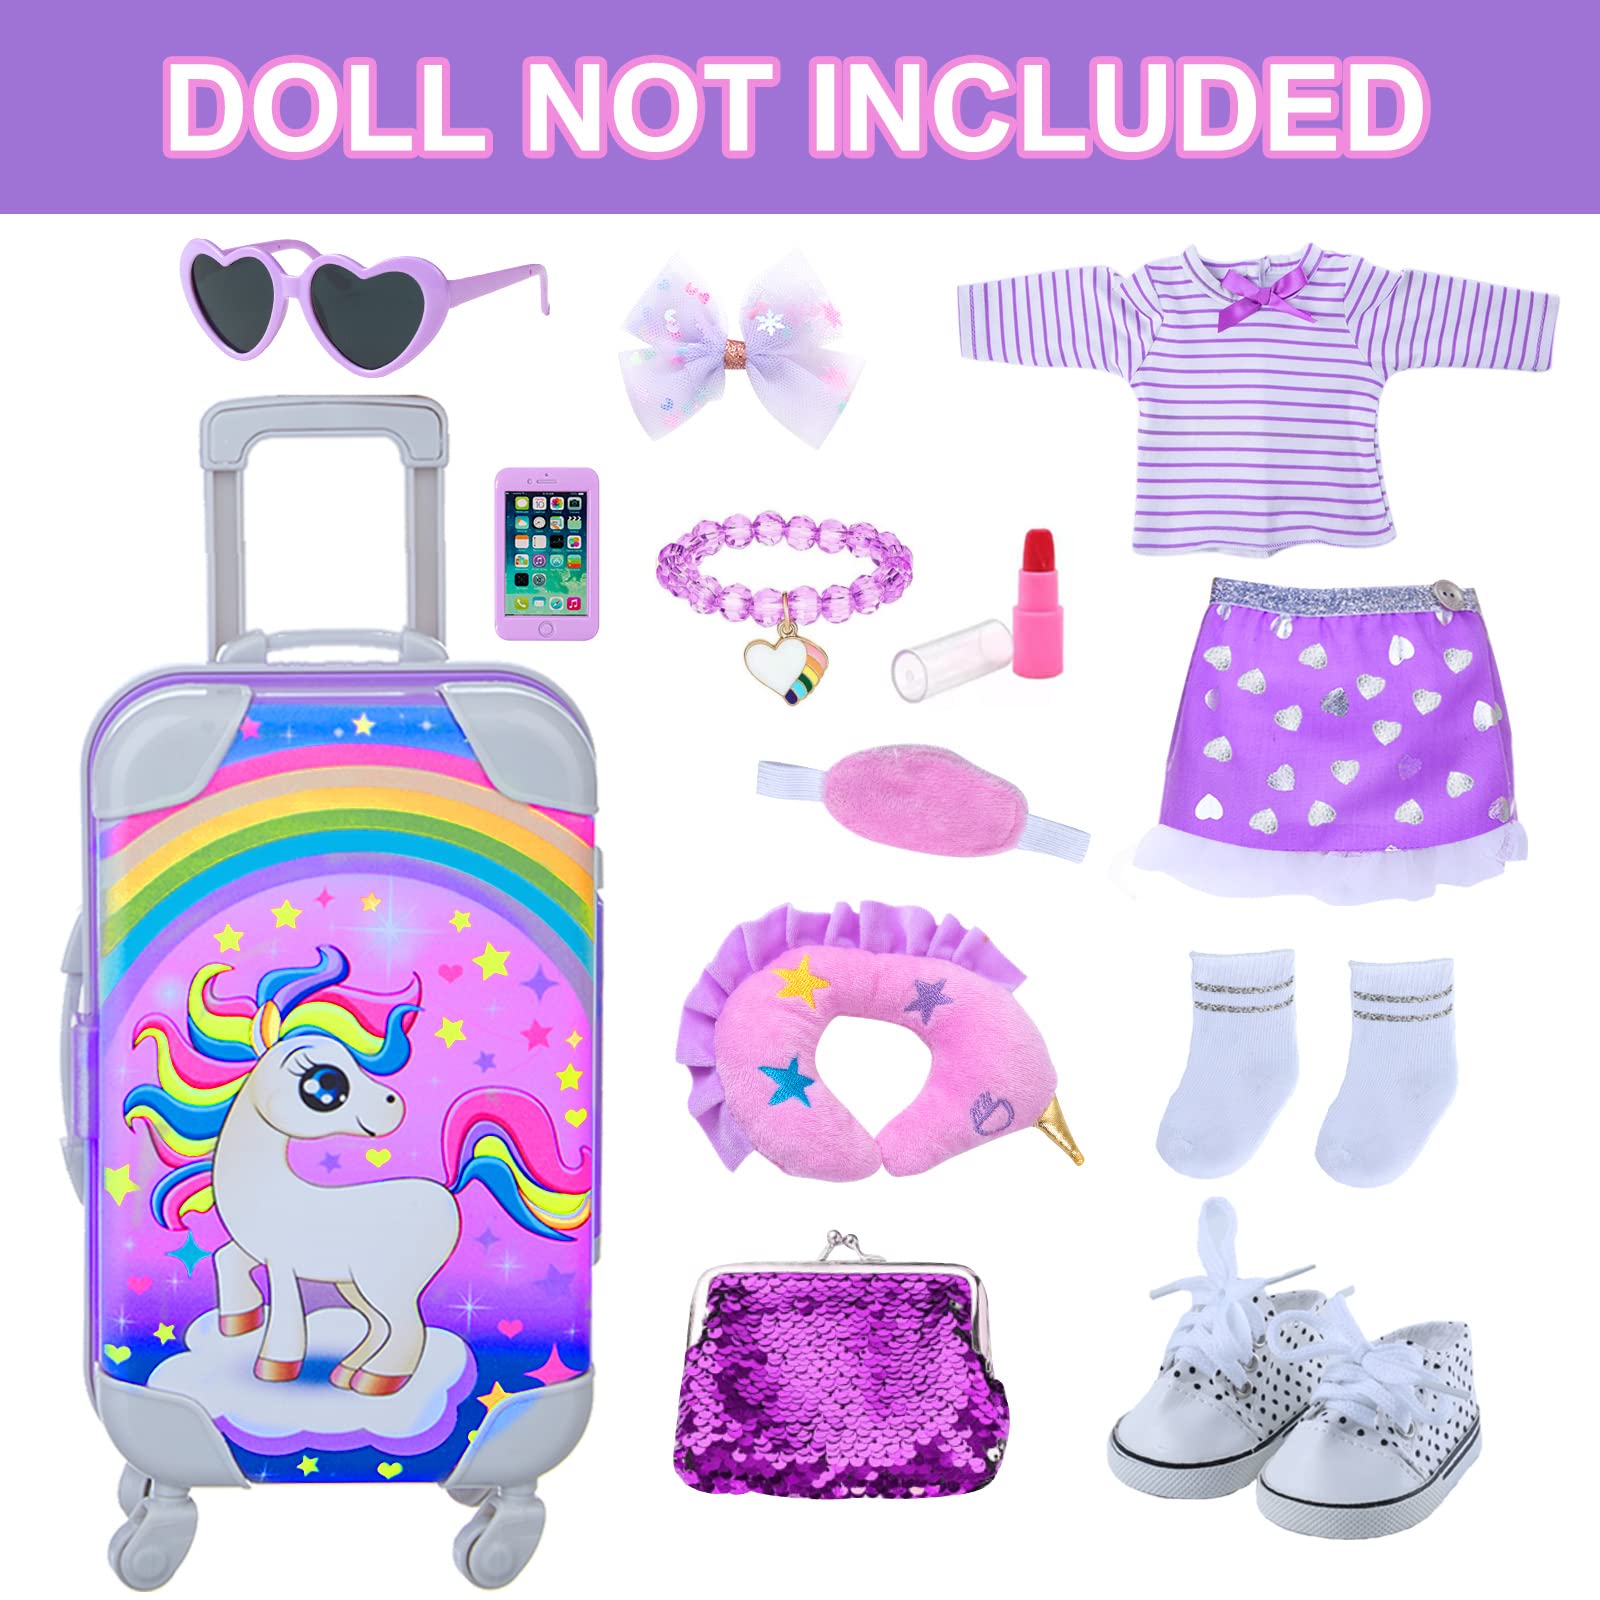 DONTNO 29 Pcs American Doll Clothes and Accessories, Cute Travel Play Set fit 18 Inch Doll with Purple Clothes Suit, Unicorn Suitcase, Handbag, Lipstick, Camera, Sunglasses for Kids